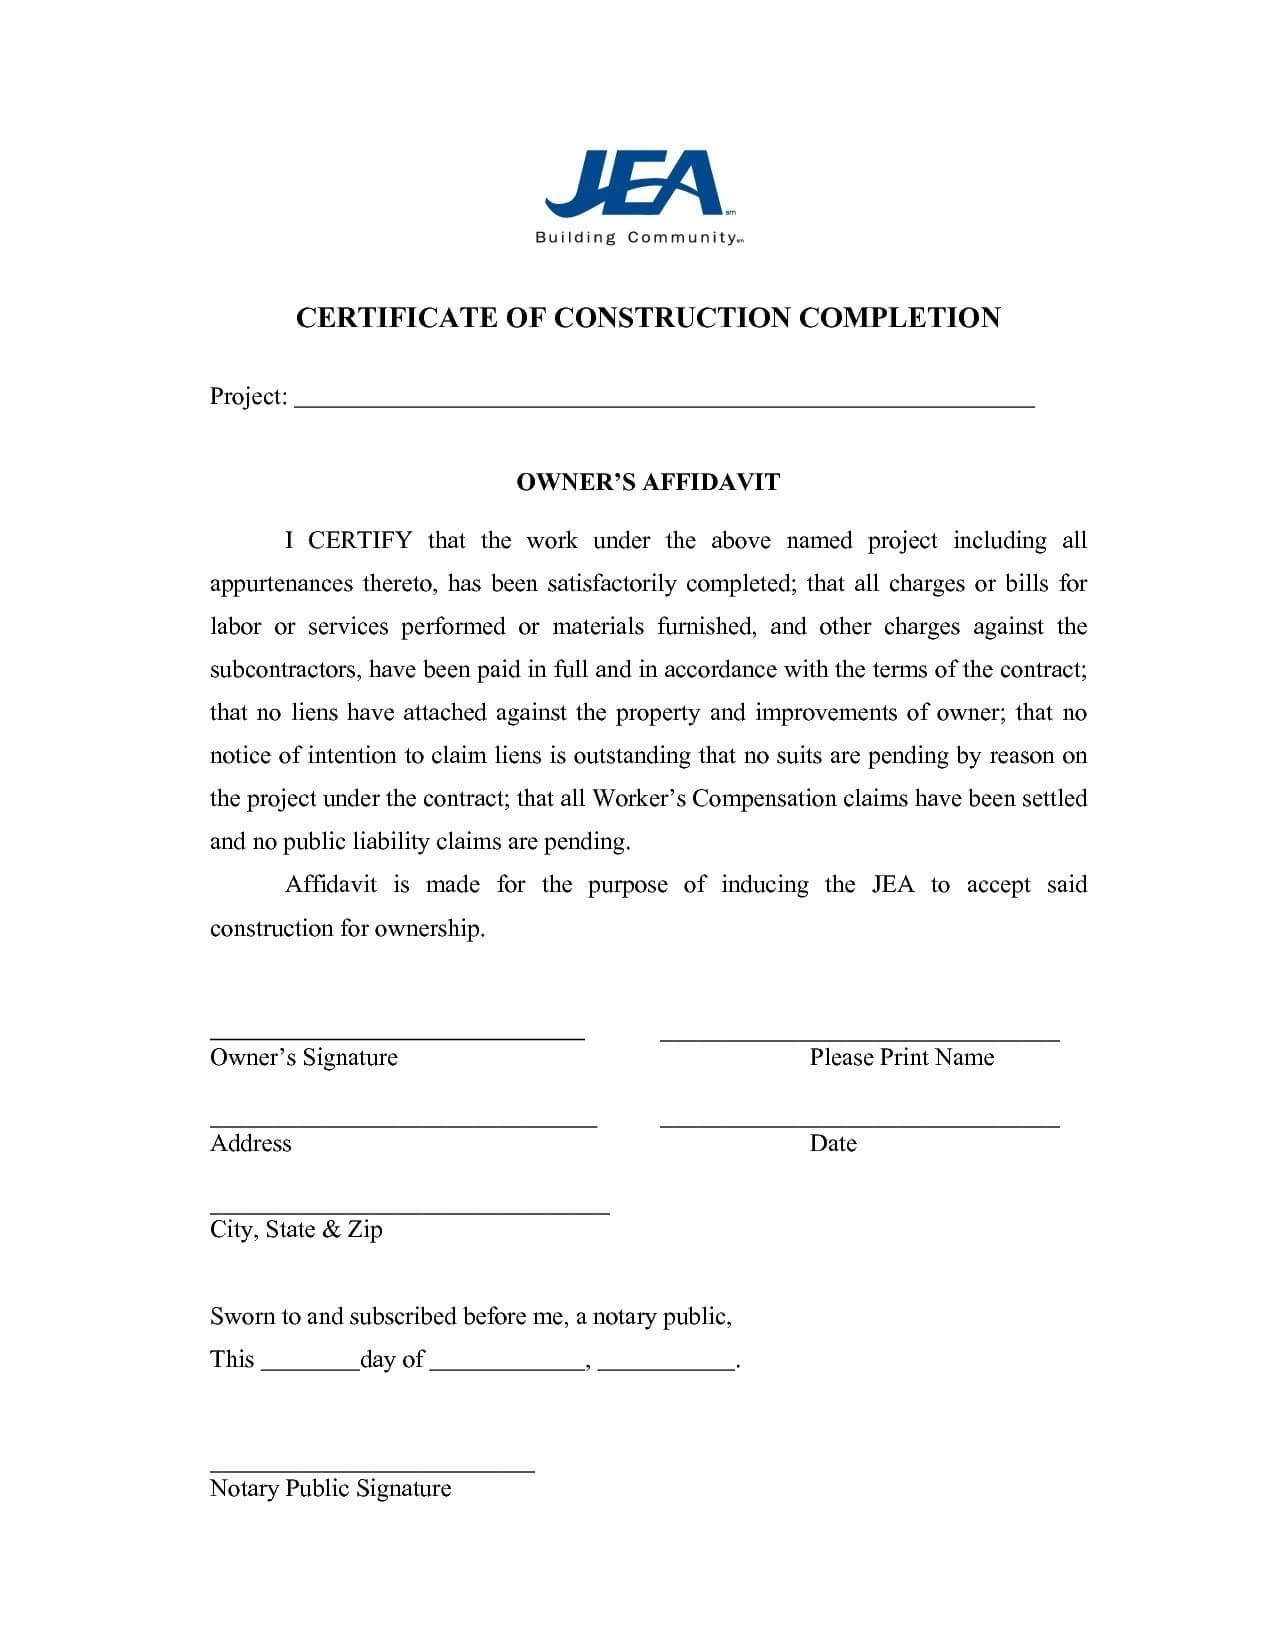 Project Completion Certificate Sample – Zimer.bwong.co Pertaining To Construction Certificate Of Completion Template